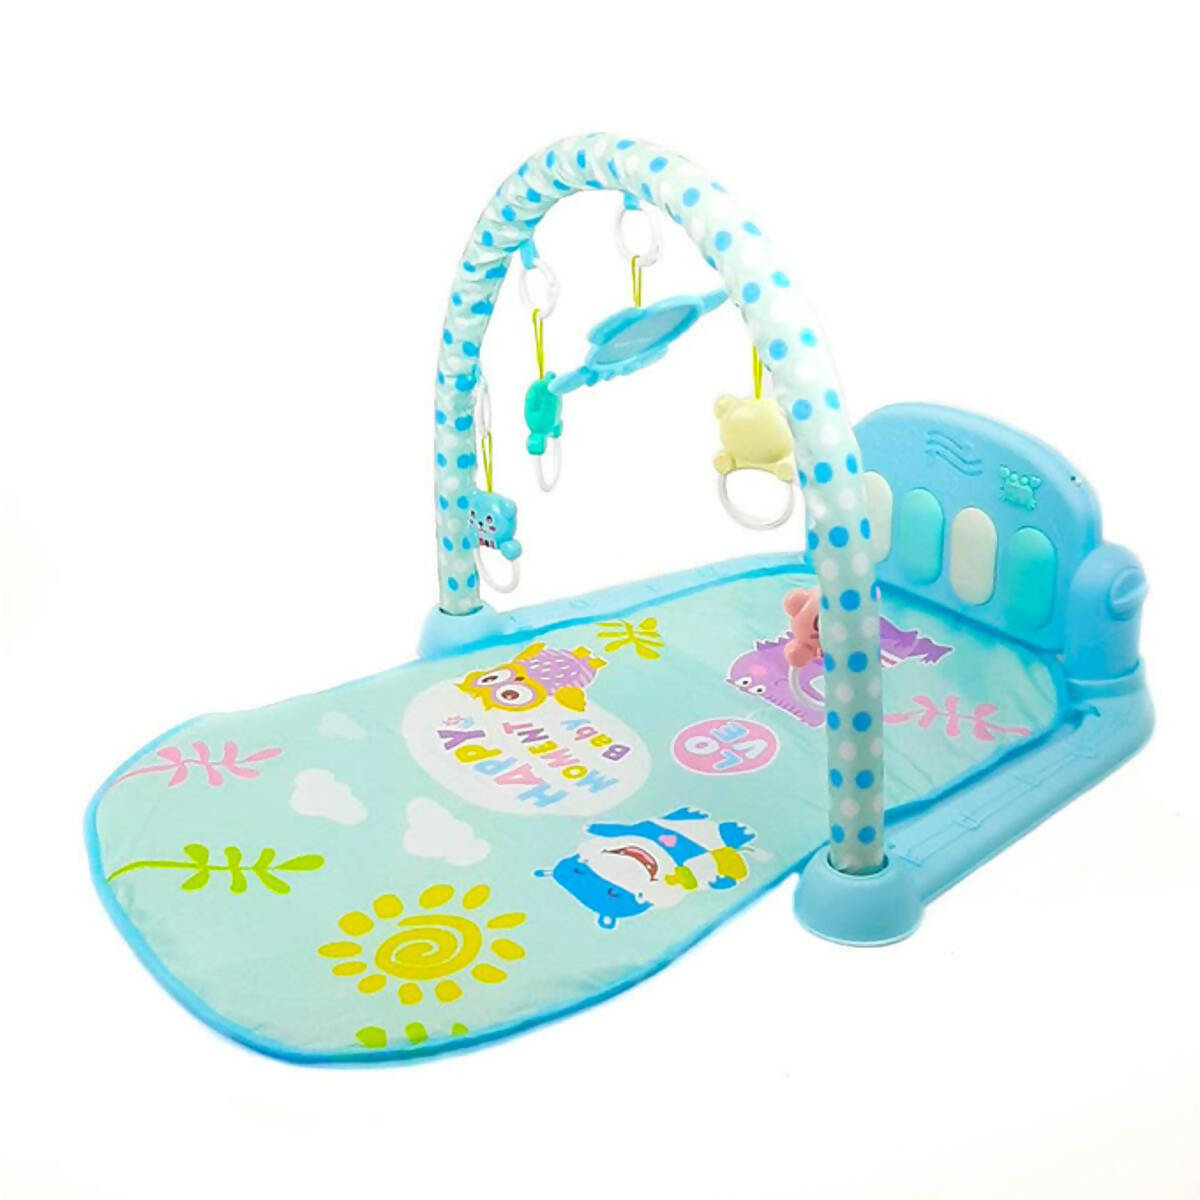 Baby Carpet 3 In 1 Newborn Musical Play Gym Piano Fitness Mat - Pink